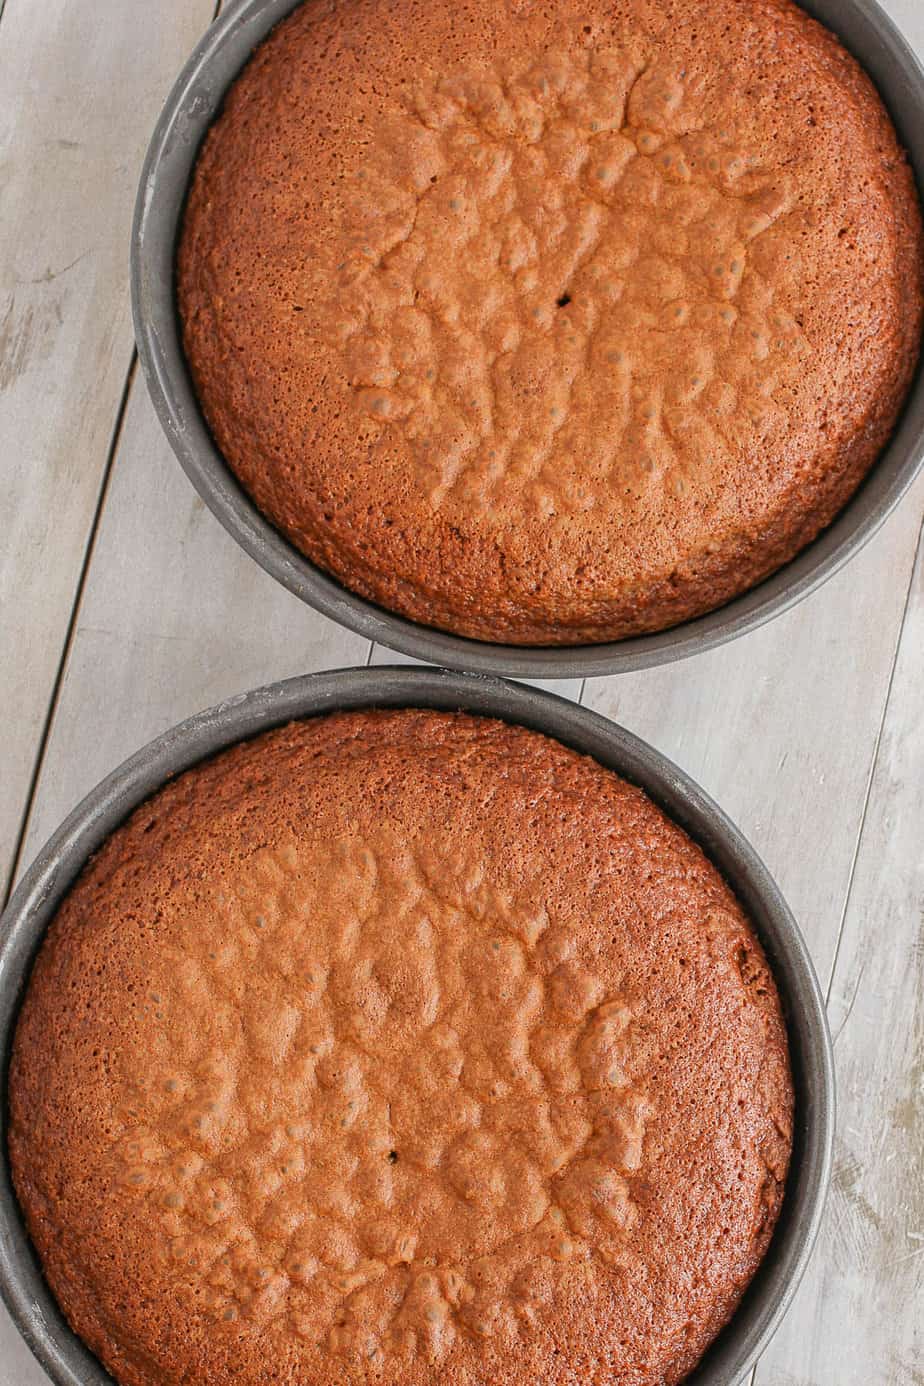 Carrot cakes fresh out of the oven in baking pans.